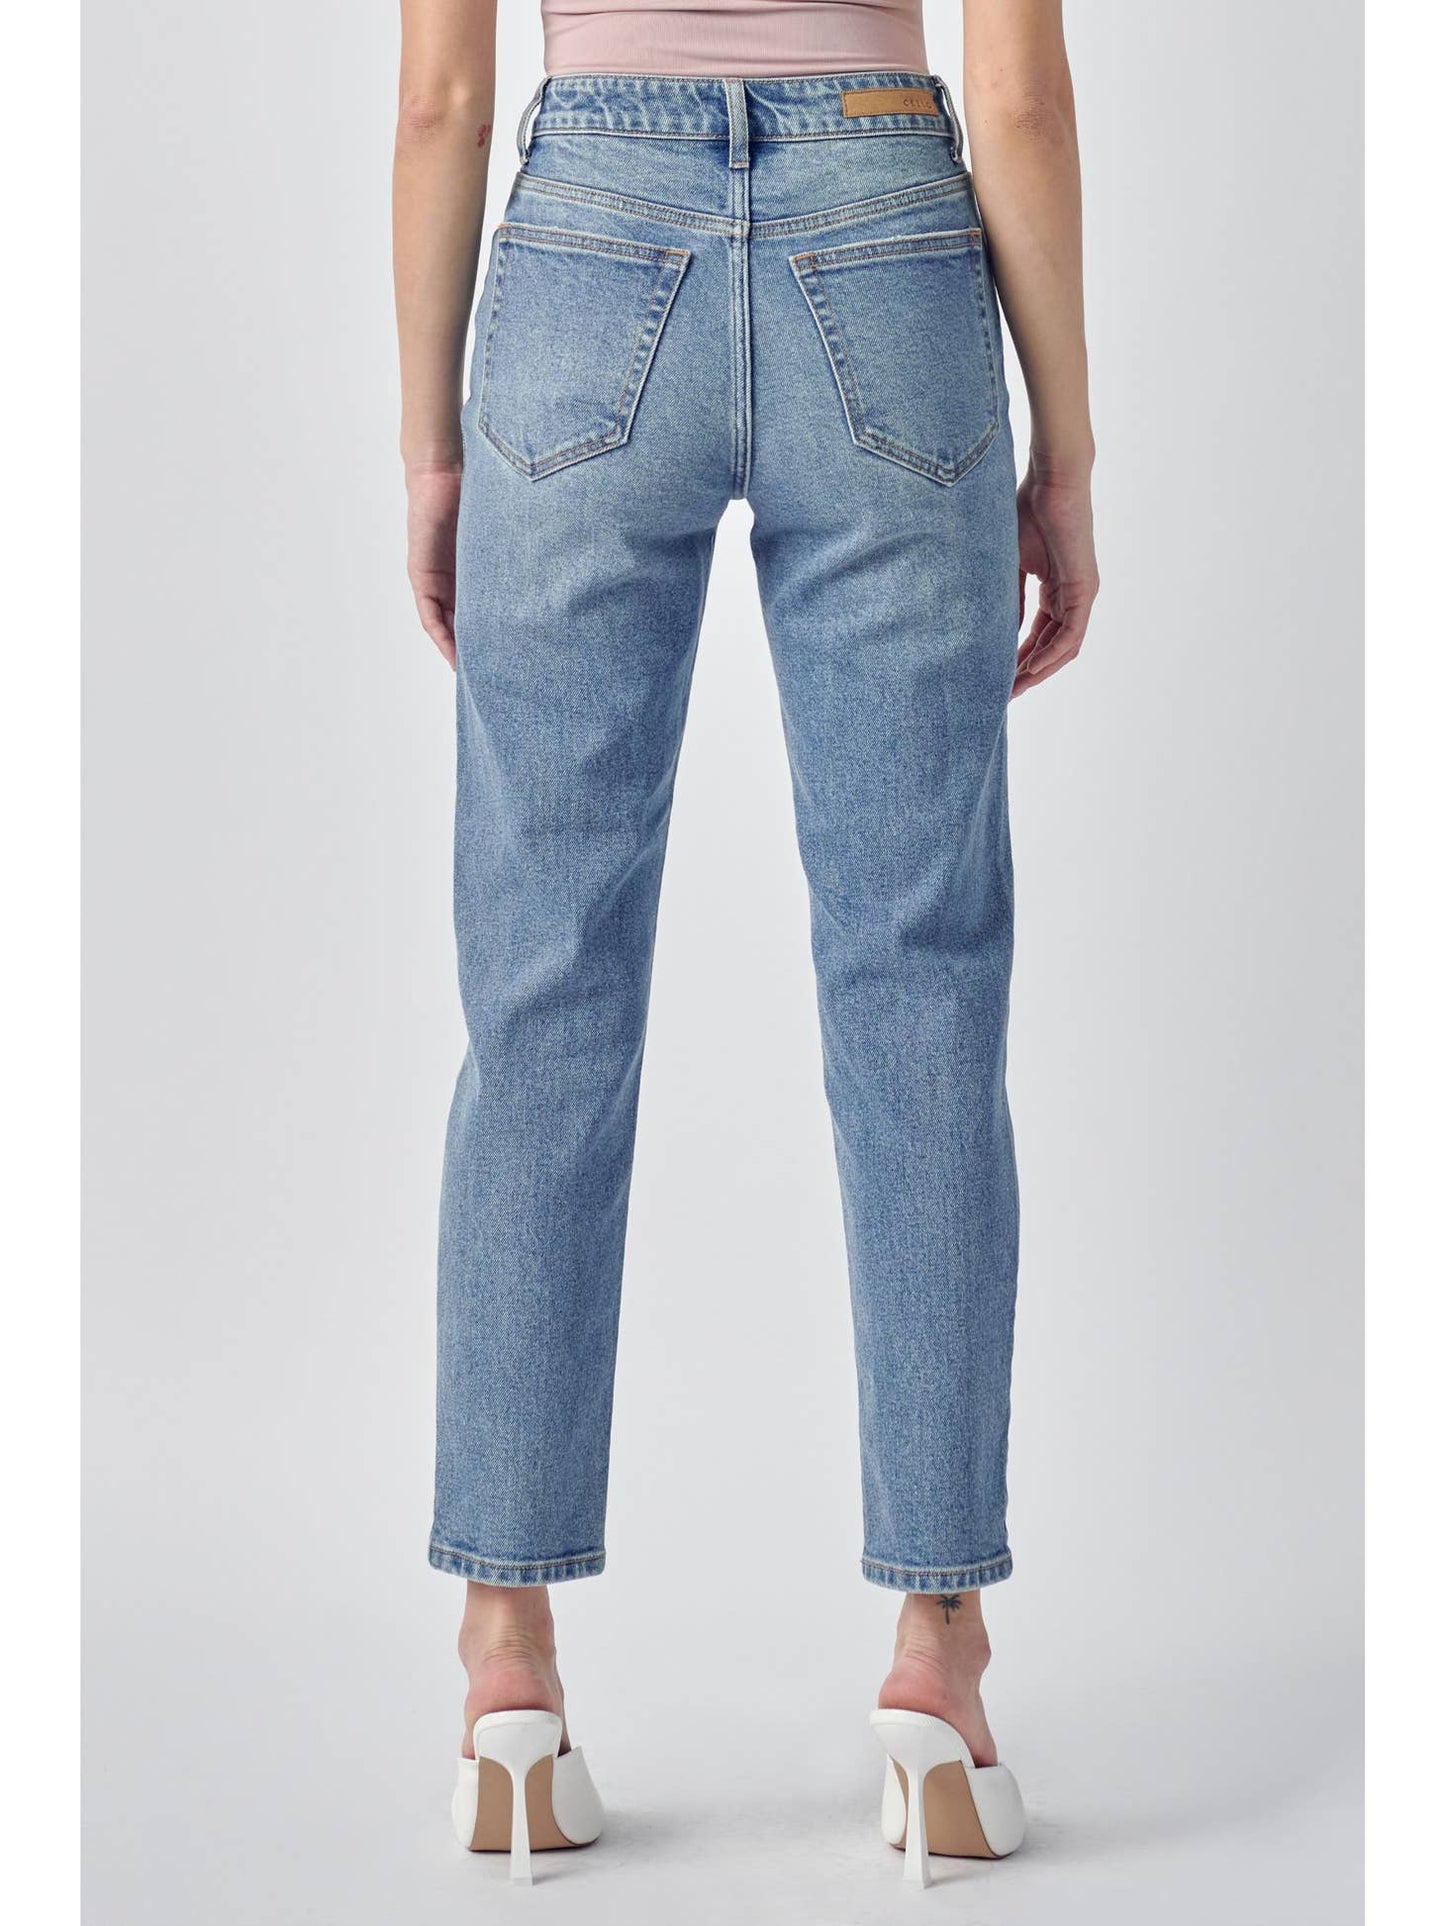 Cello High rise light wash straight jeans 